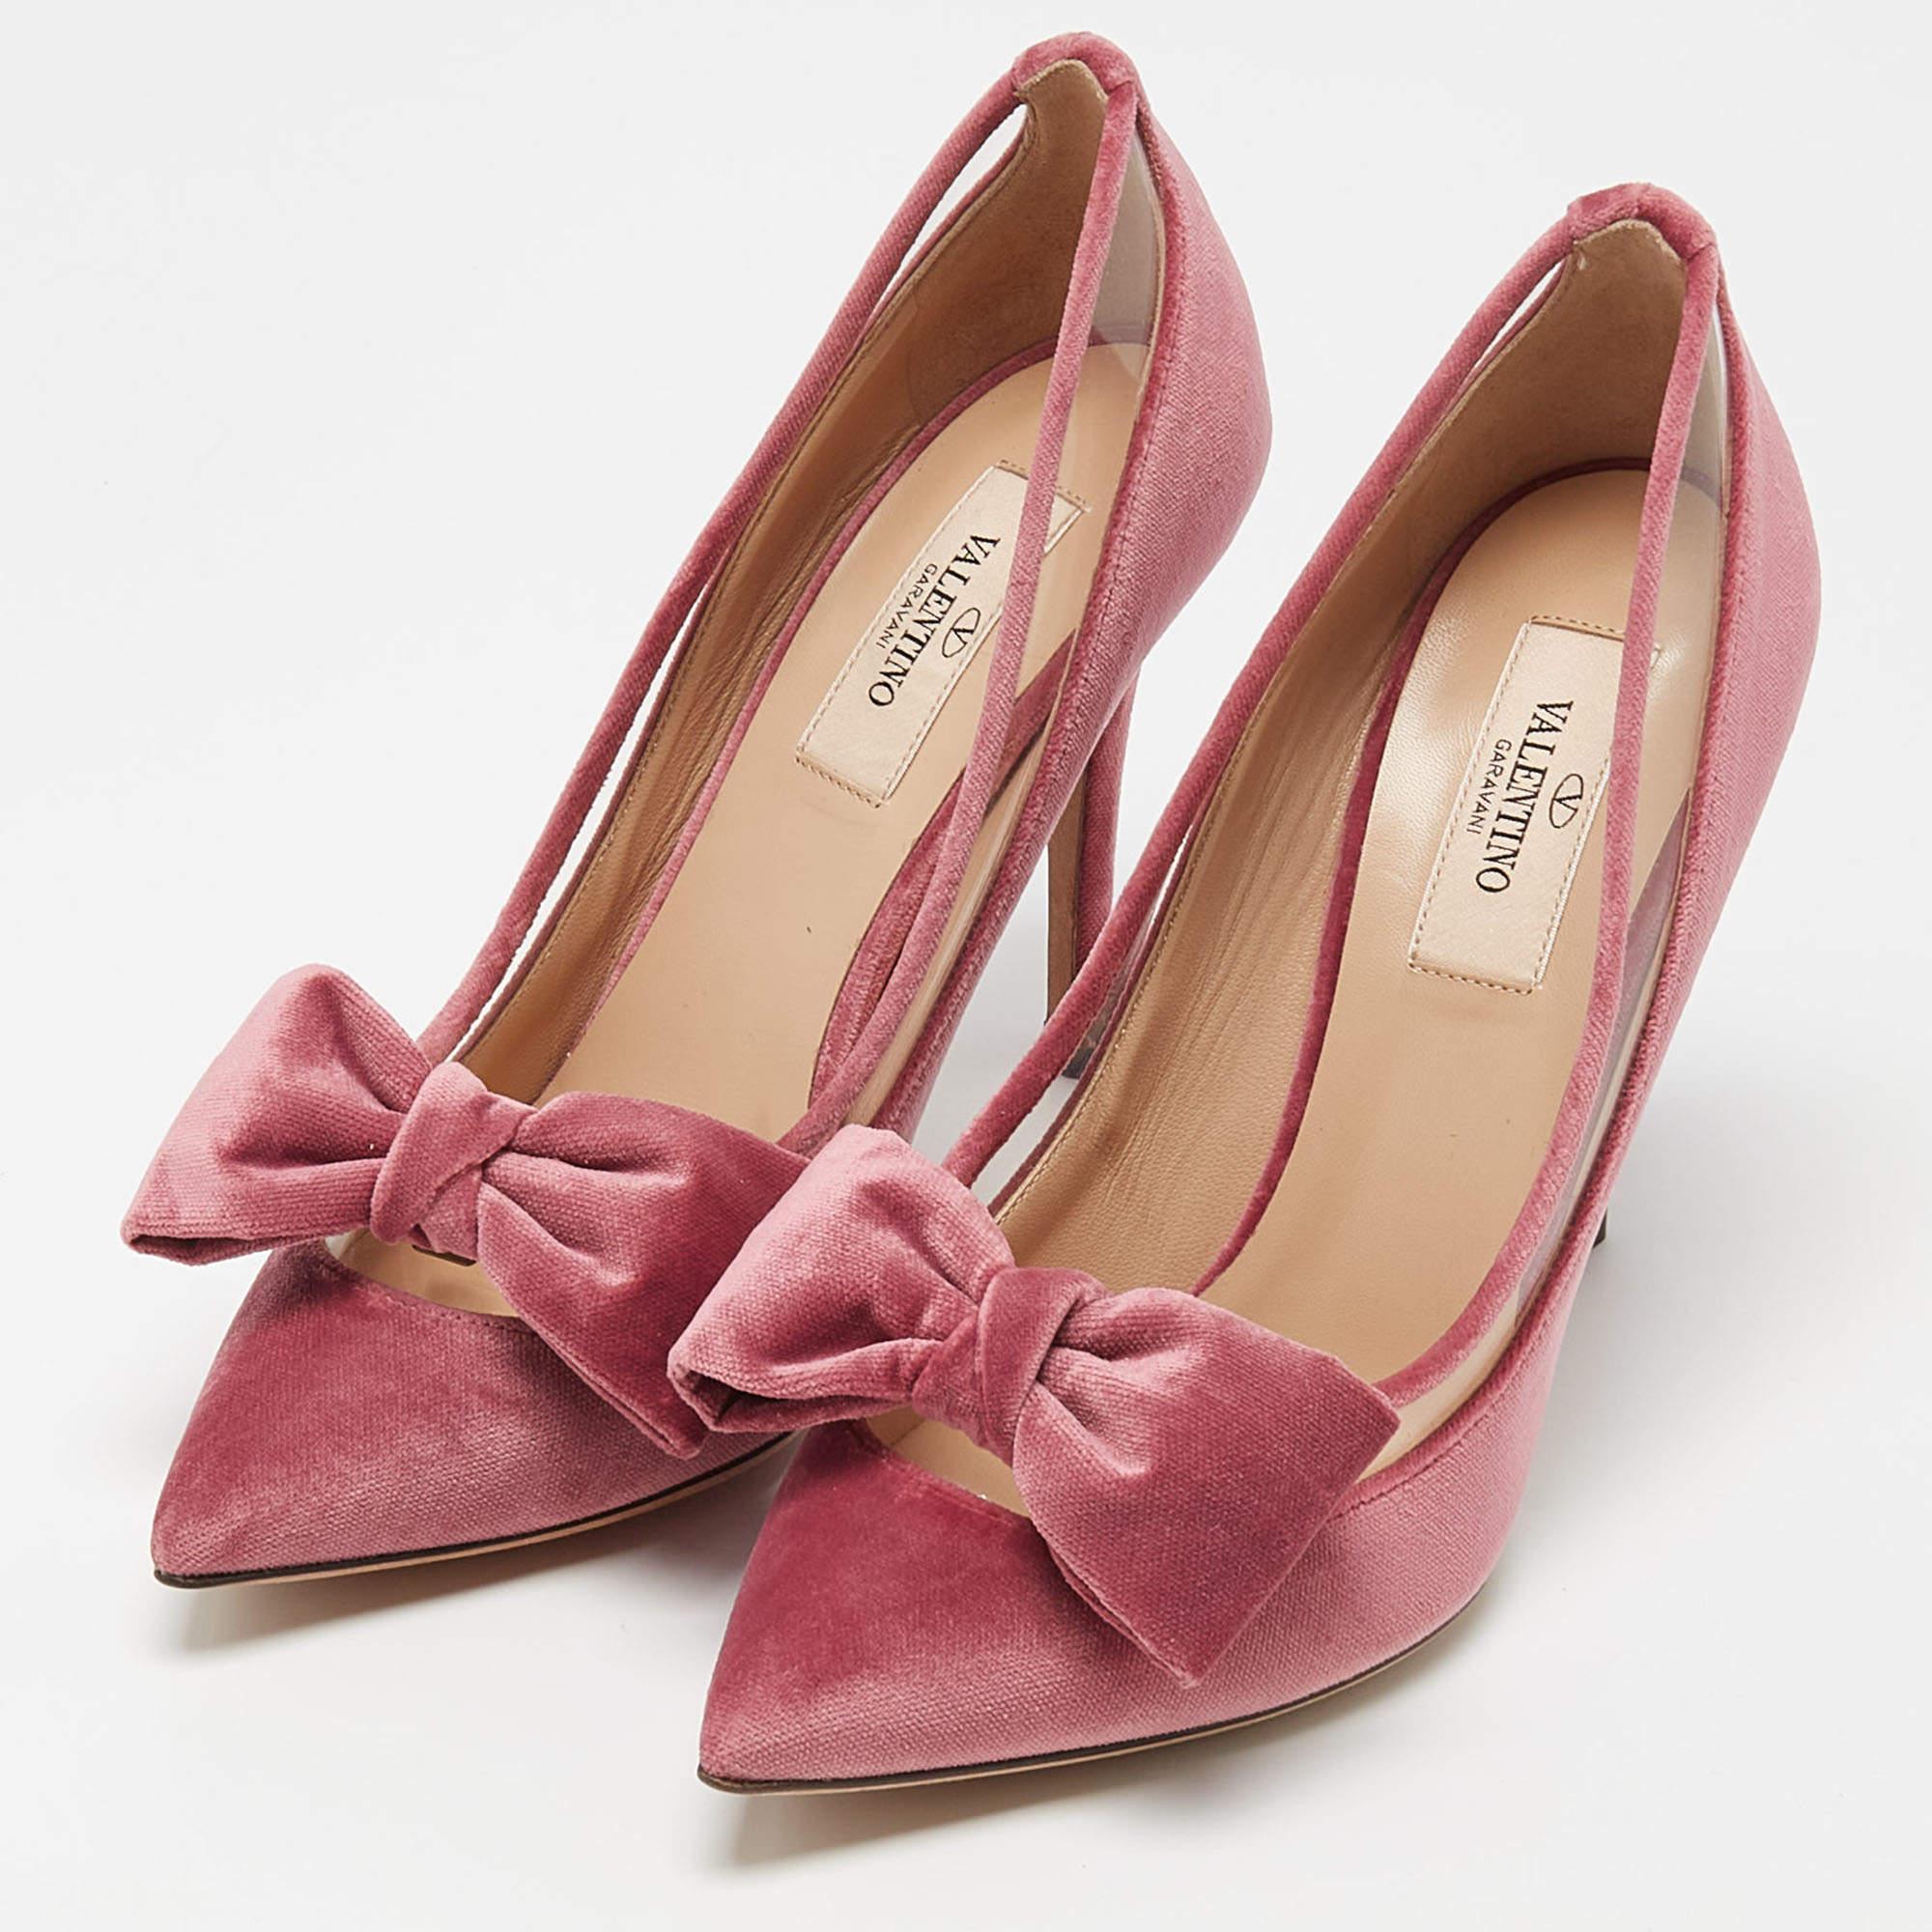 Pump shoes for women are a versatile and stylish choice for any wardrobe. Featuring a classic design with perfect arches, these shoes can be dressed up or down for any occasion. Their comfortable fit and easy slip-on design make them a go-to choice